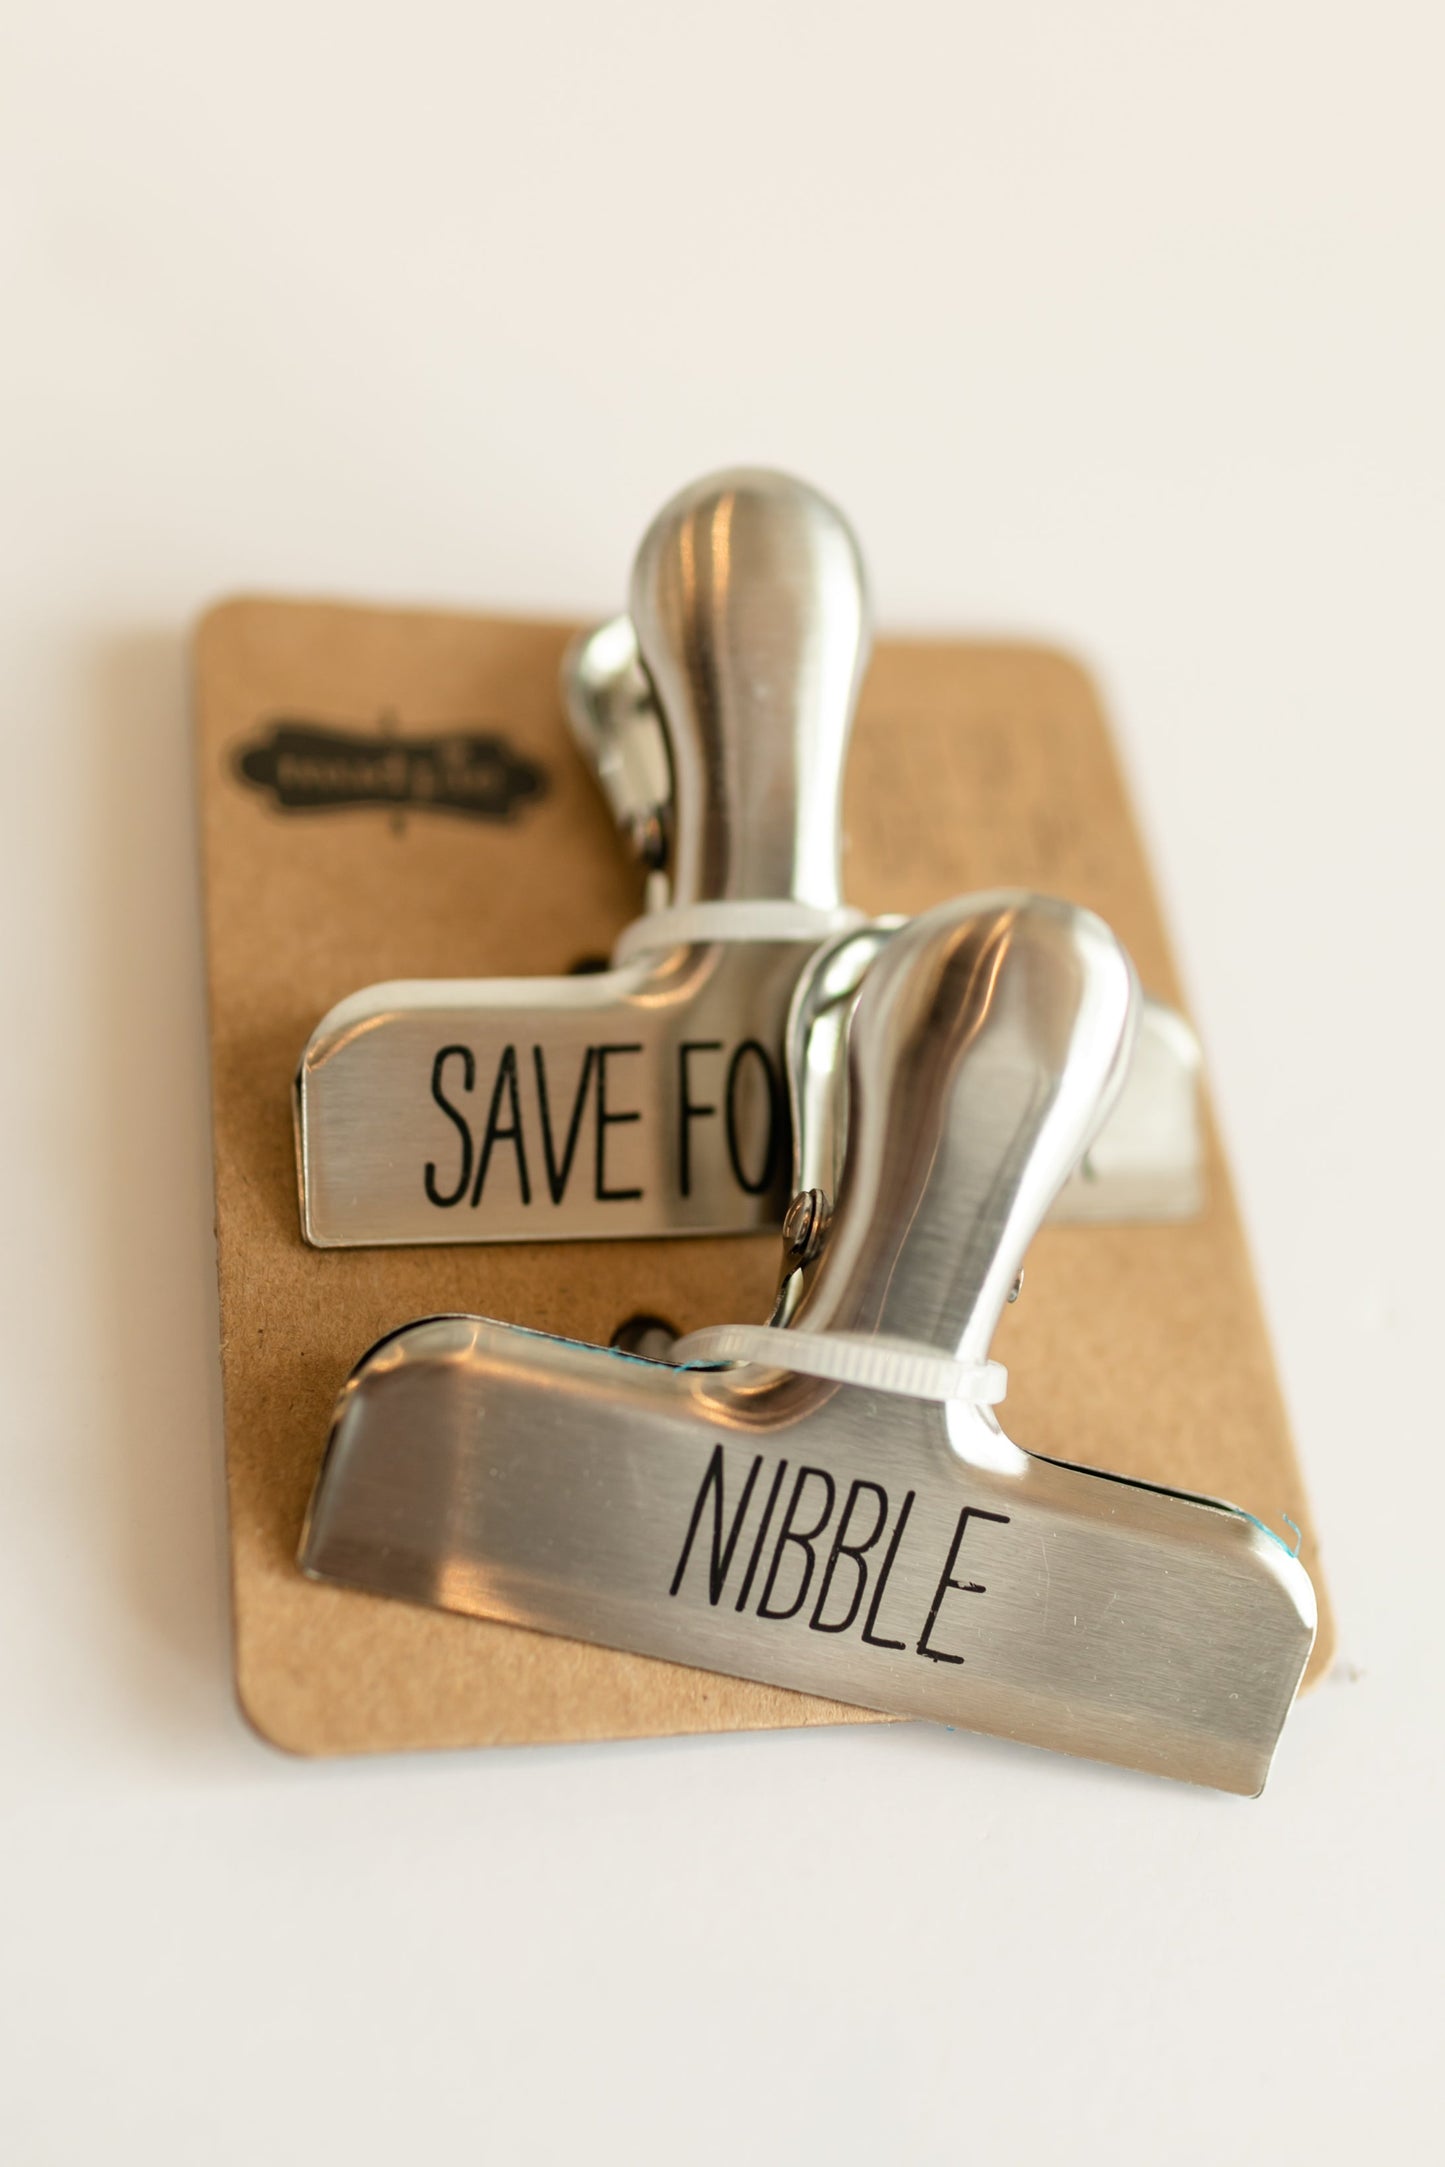 Bistro Bag Chip Clips Home & Lifestyle Nibble